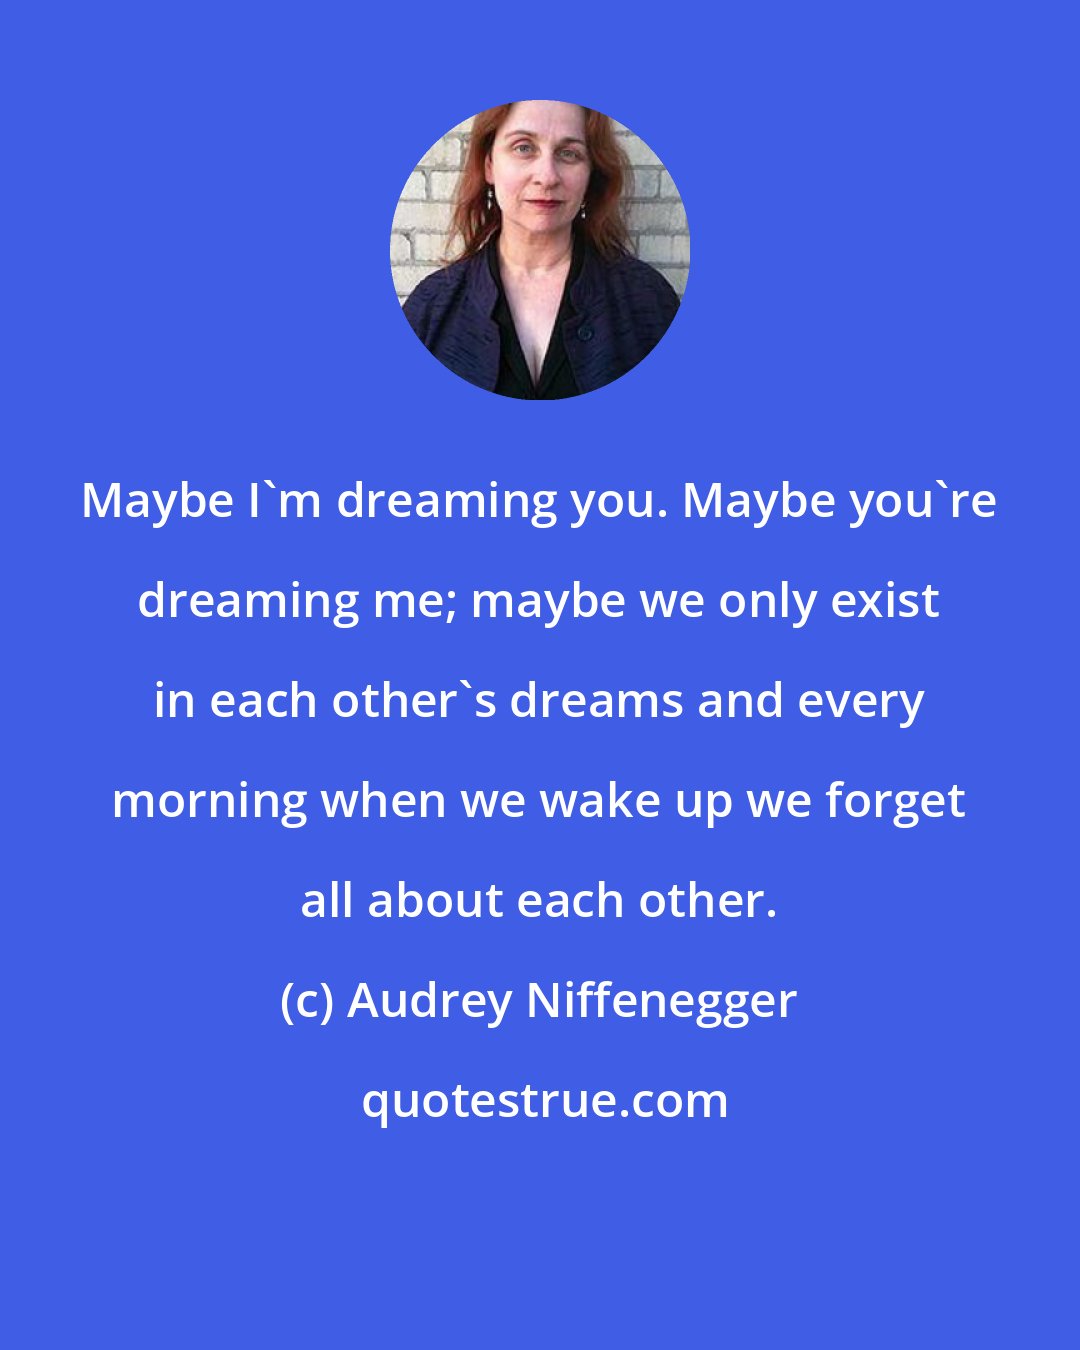 Audrey Niffenegger: Maybe I'm dreaming you. Maybe you're dreaming me; maybe we only exist in each other's dreams and every morning when we wake up we forget all about each other.